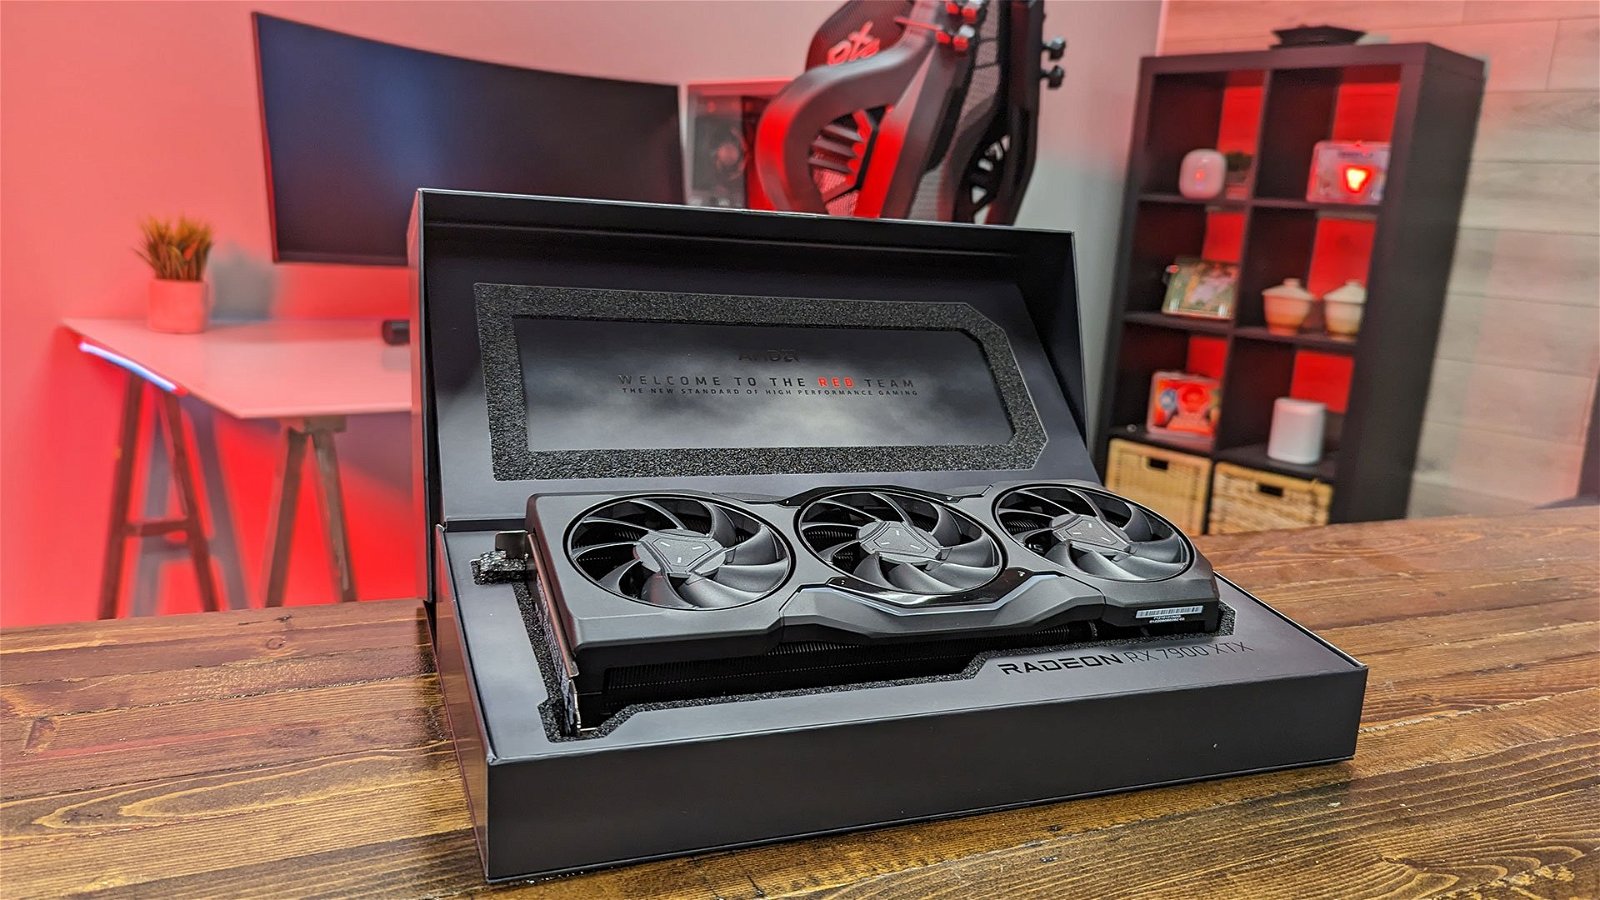 AMD Radeon RX 7900 XT / XTX review: 4K performance for less - The